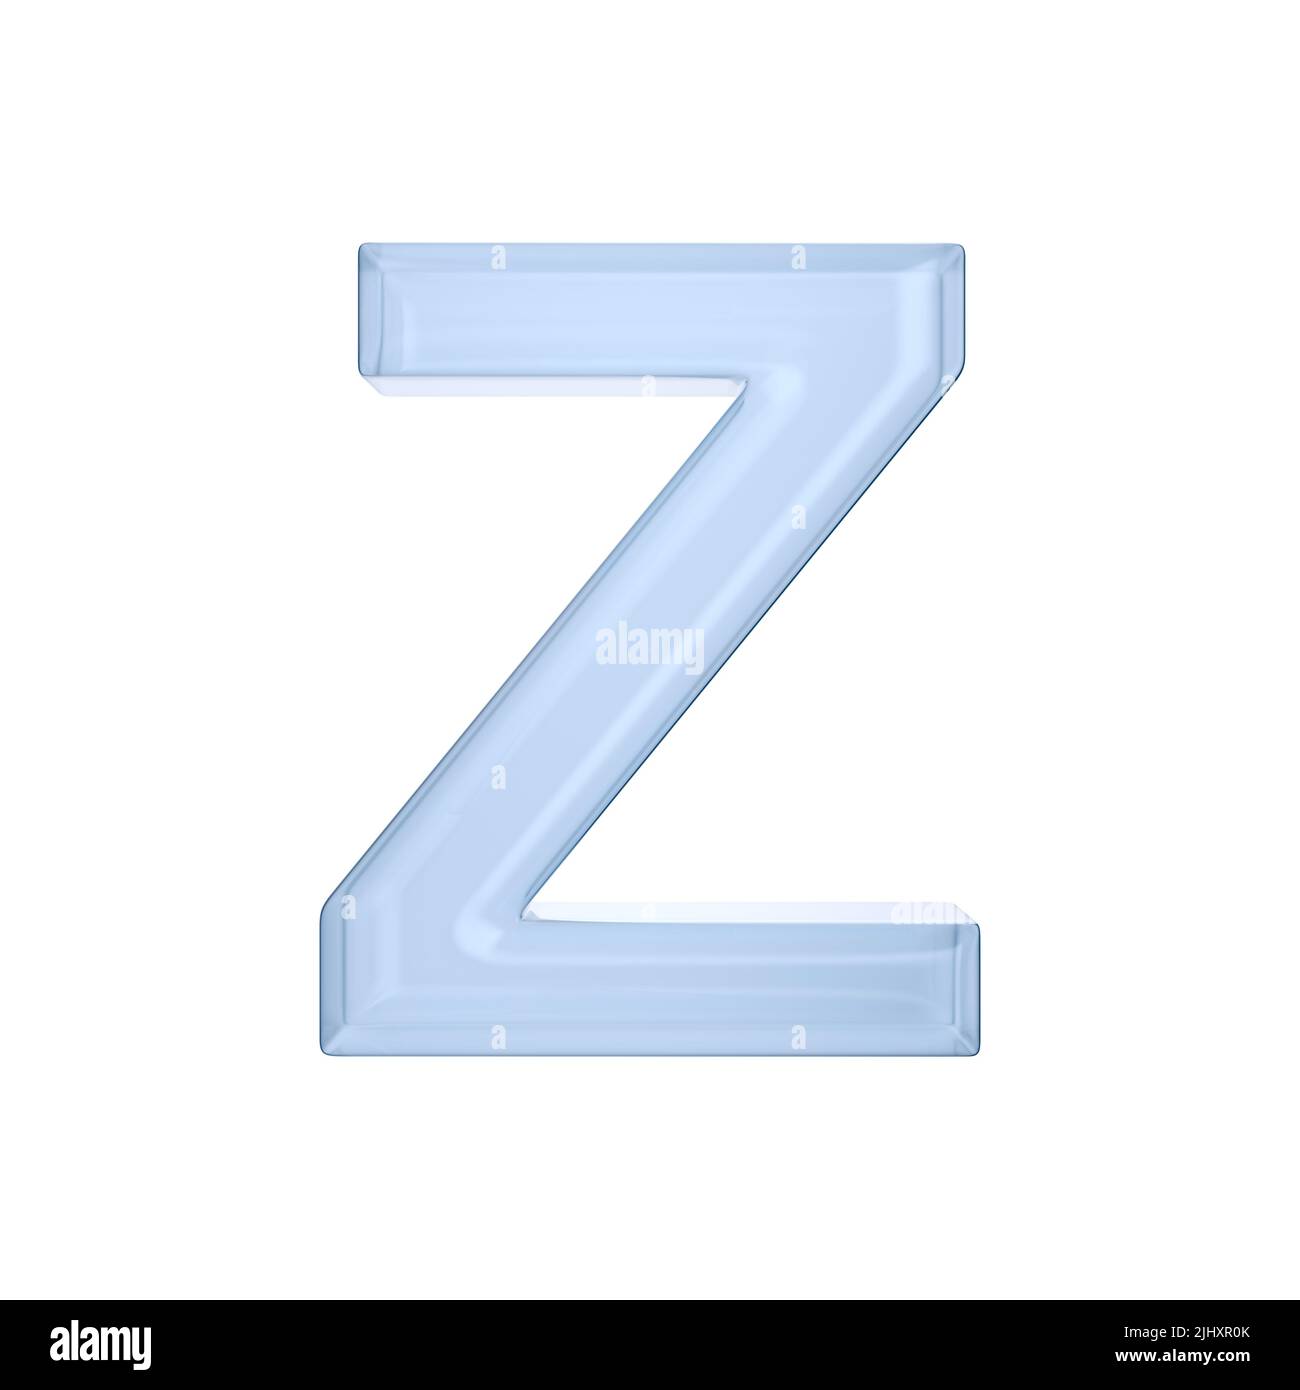 Character Z on white background. Isolated 3D illustration Stock Photo